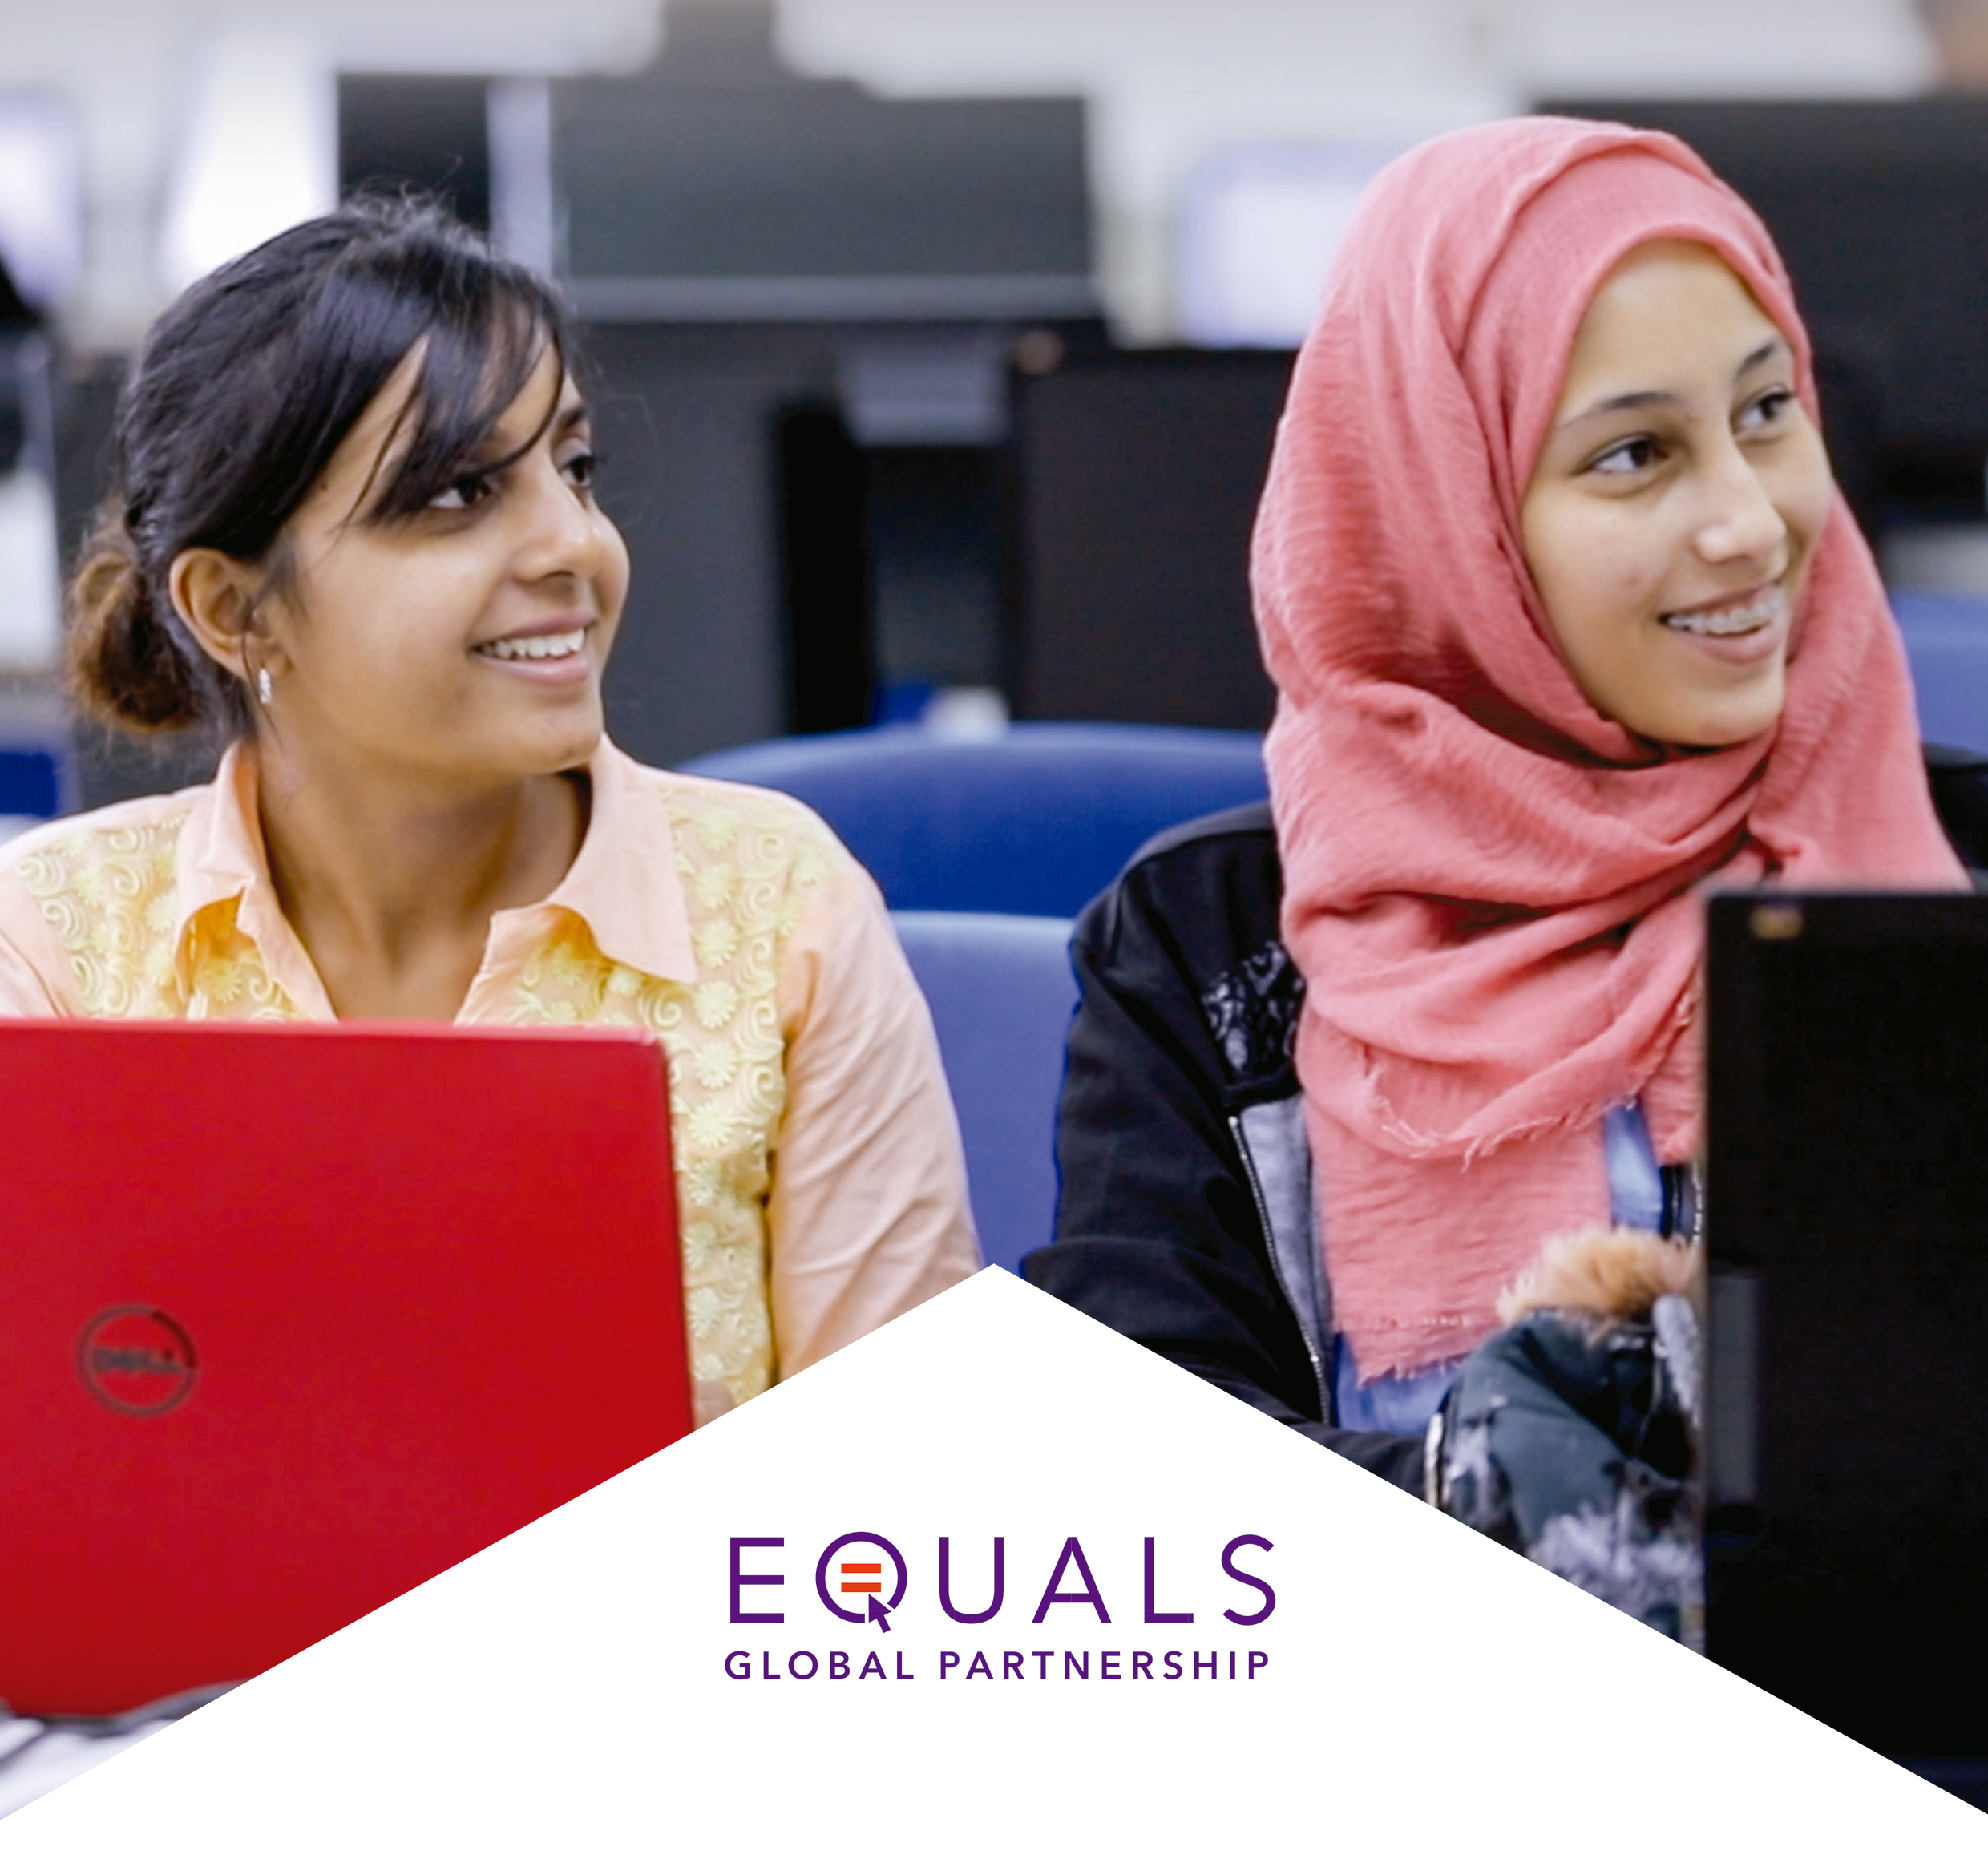 Two women sitting in front of their computers and smiling. Below the image of the women is a white triangle with the words "EQUALS Global Partnership" written in purple